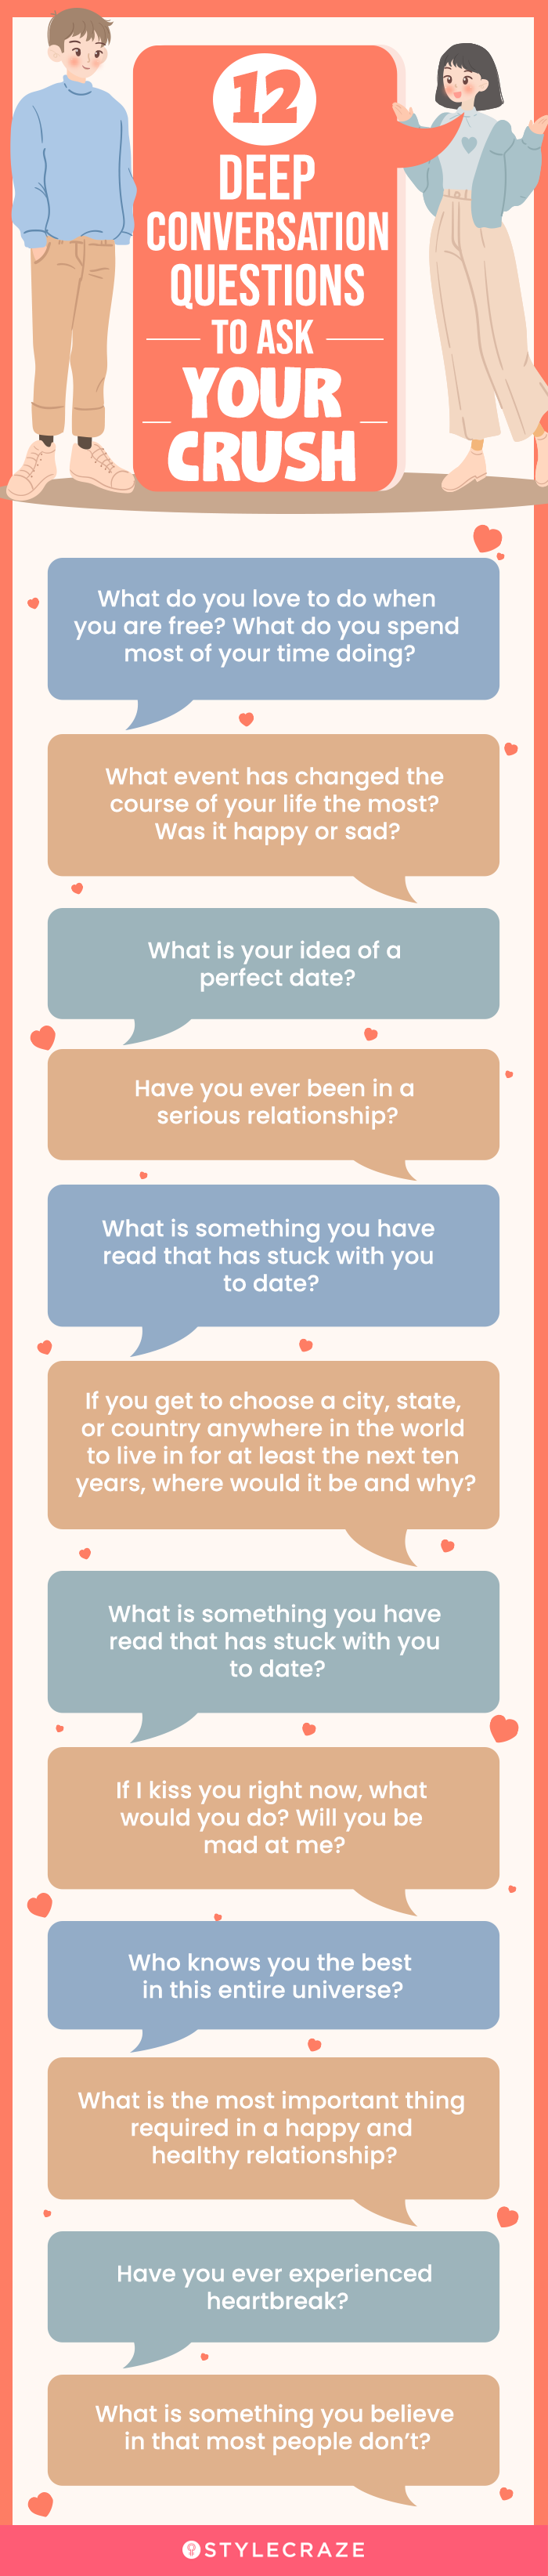 12 deep conversation questions to ask your crush (infographic)